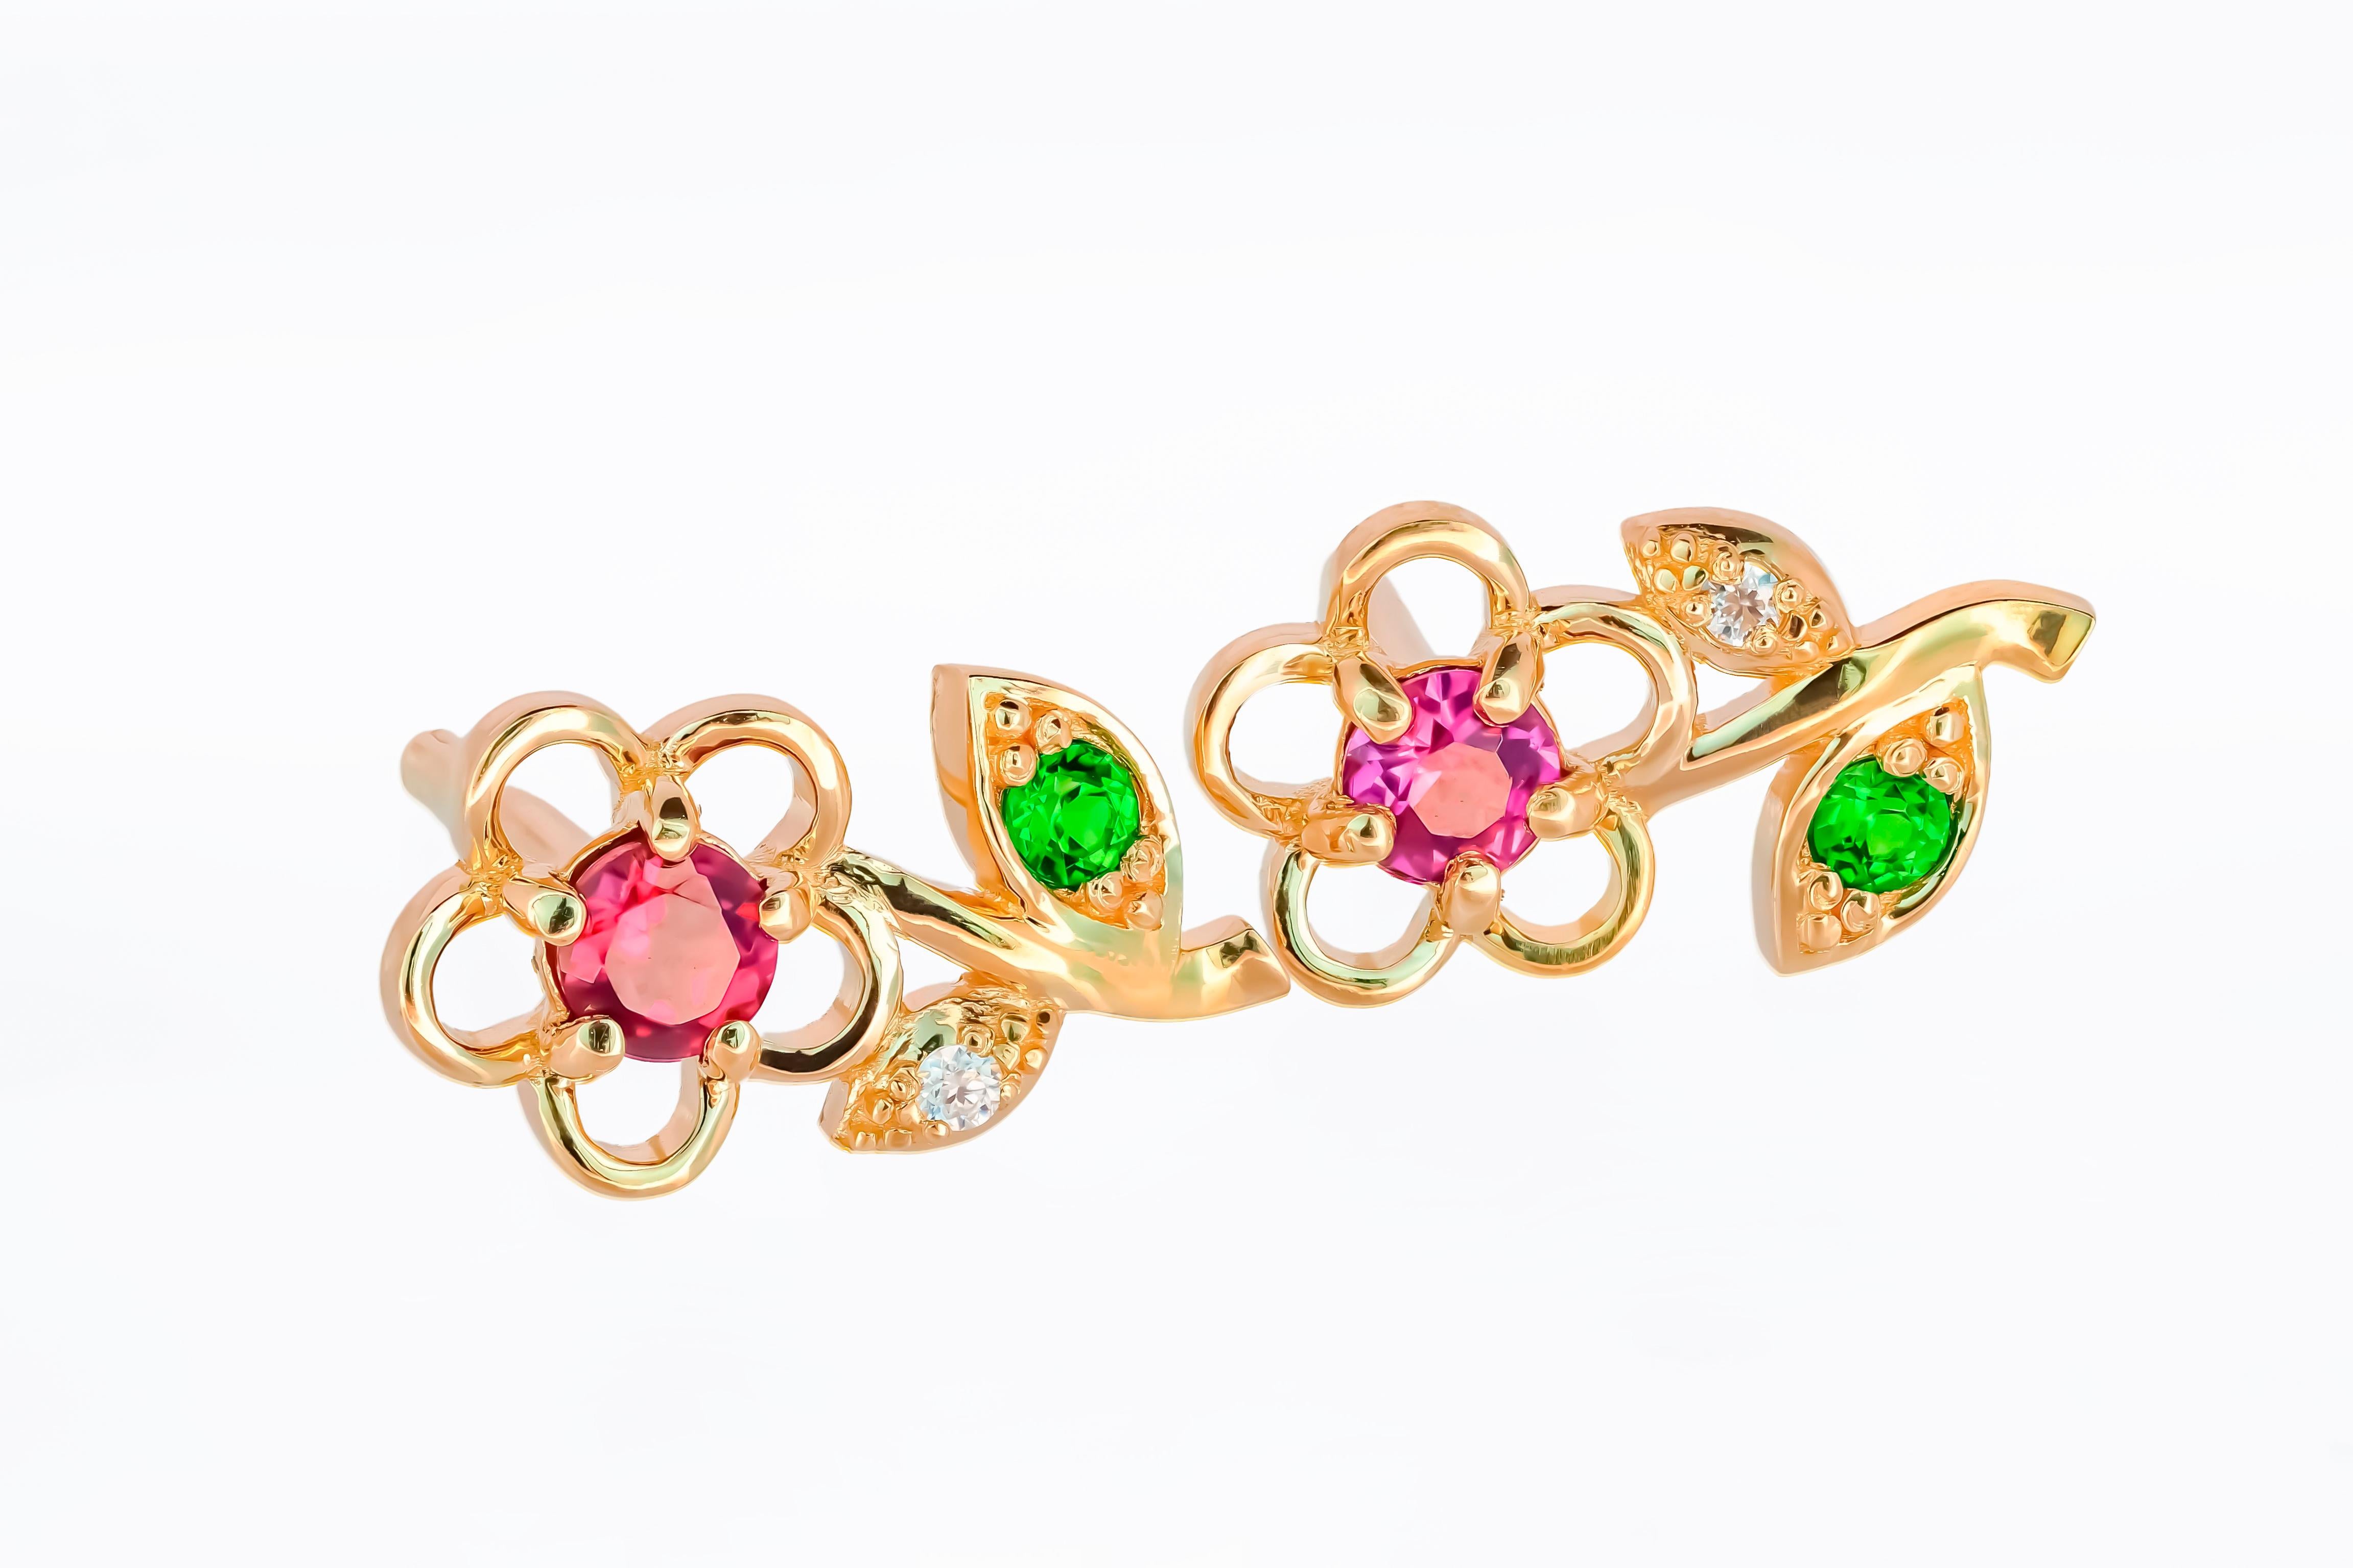 14 karat gold earrings studs with genuine garnets, tsavorites and diamonds. January birthstone.
Metal: 14 karat gold 
Weight: 1.95 g.
Size: 13 x 6 mm.
Central stones:
Genuine garnets: weight - 0.08 ct x 2 = 0.16 ct total, red and purple color.
Round